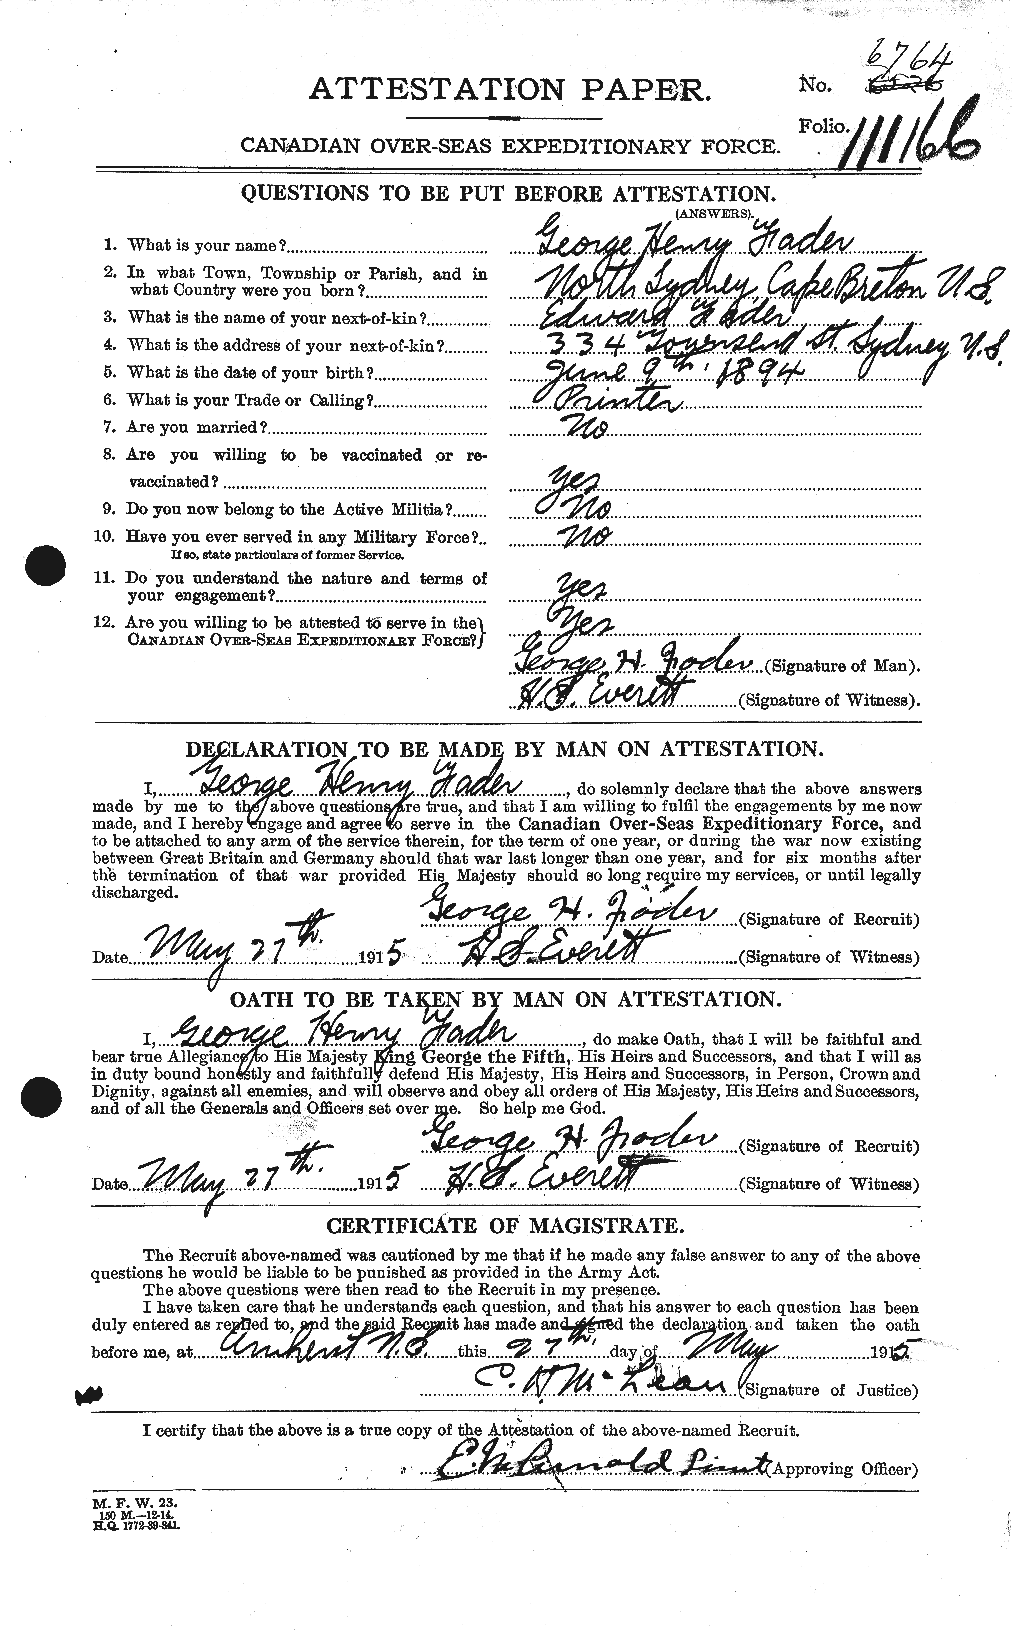 Personnel Records of the First World War - CEF 318179a